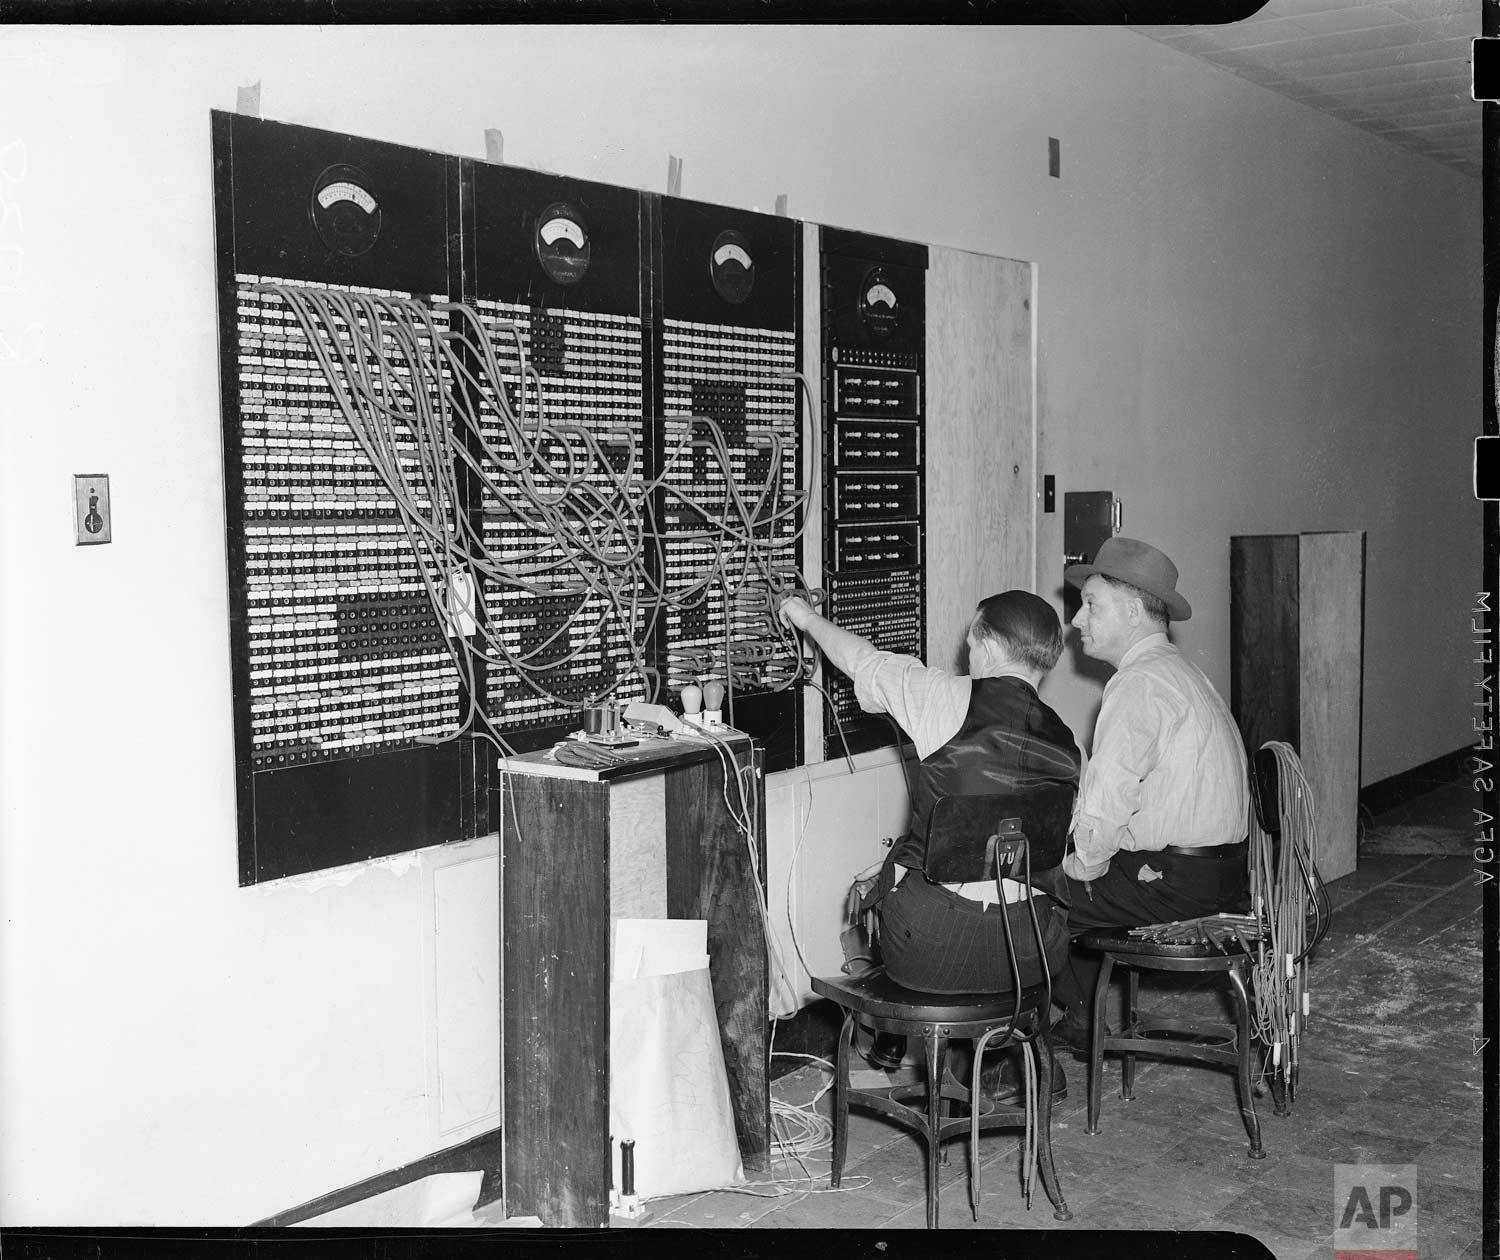  Here is the front of the master switchboard in the new Associated Press building in Rockefeller Center in New York, Dec. 18, 1938. This switchboard, comprising 157 circuits links 285,000 miles of leased wires. (AP Photo/Corporate Archives) 